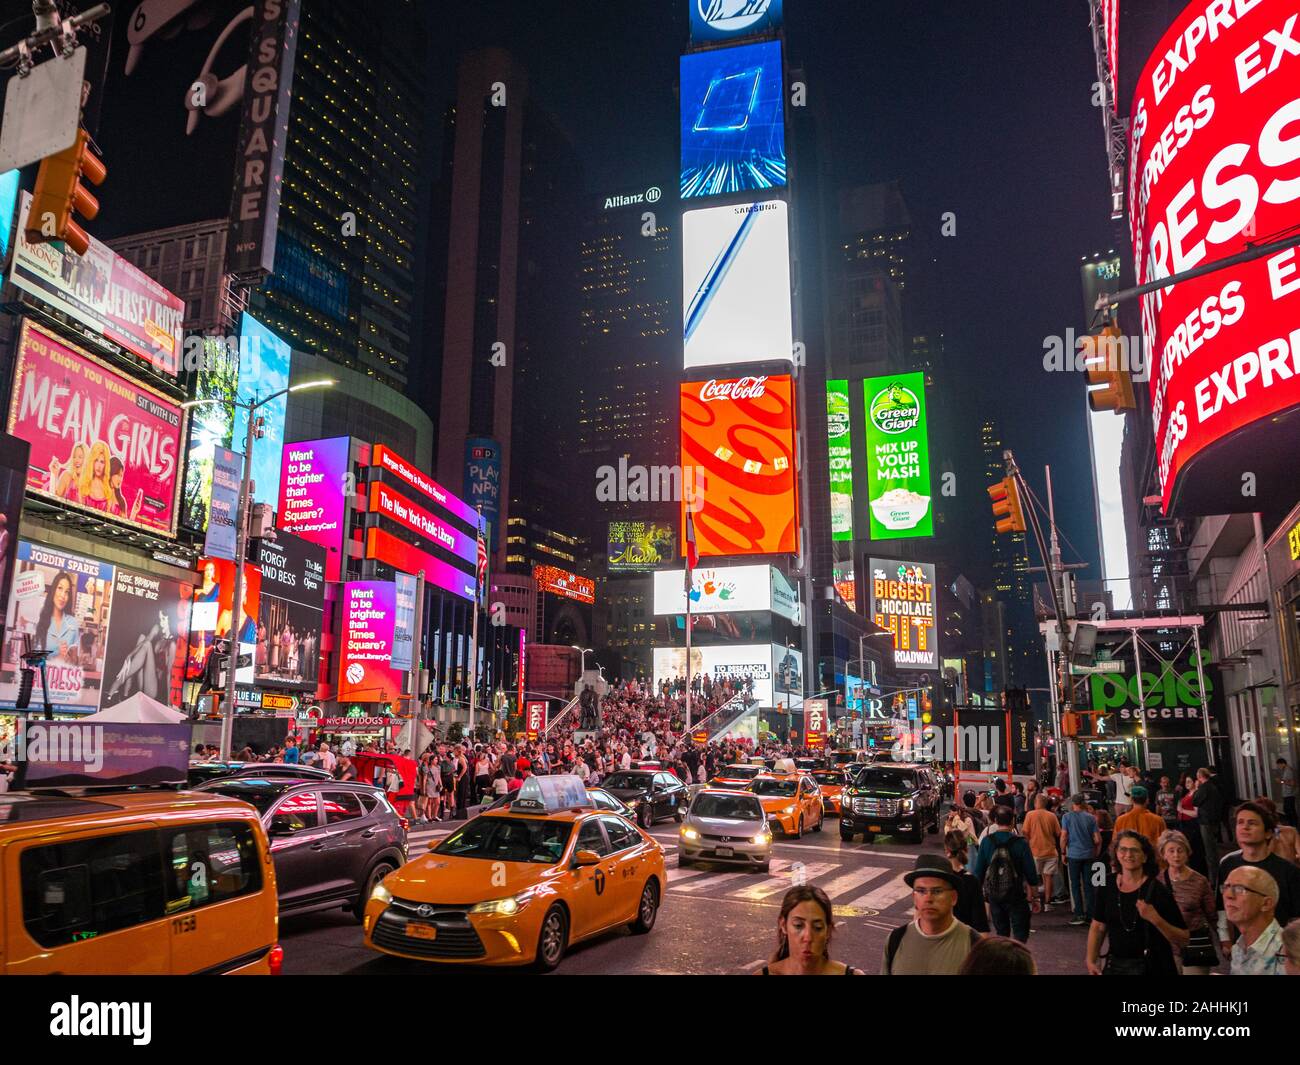 Midtown Manhattan, New York City, United States of America [ Times Square, crowded crossroad on Broadway, tourist attraction with advertisements ] Stock Photo